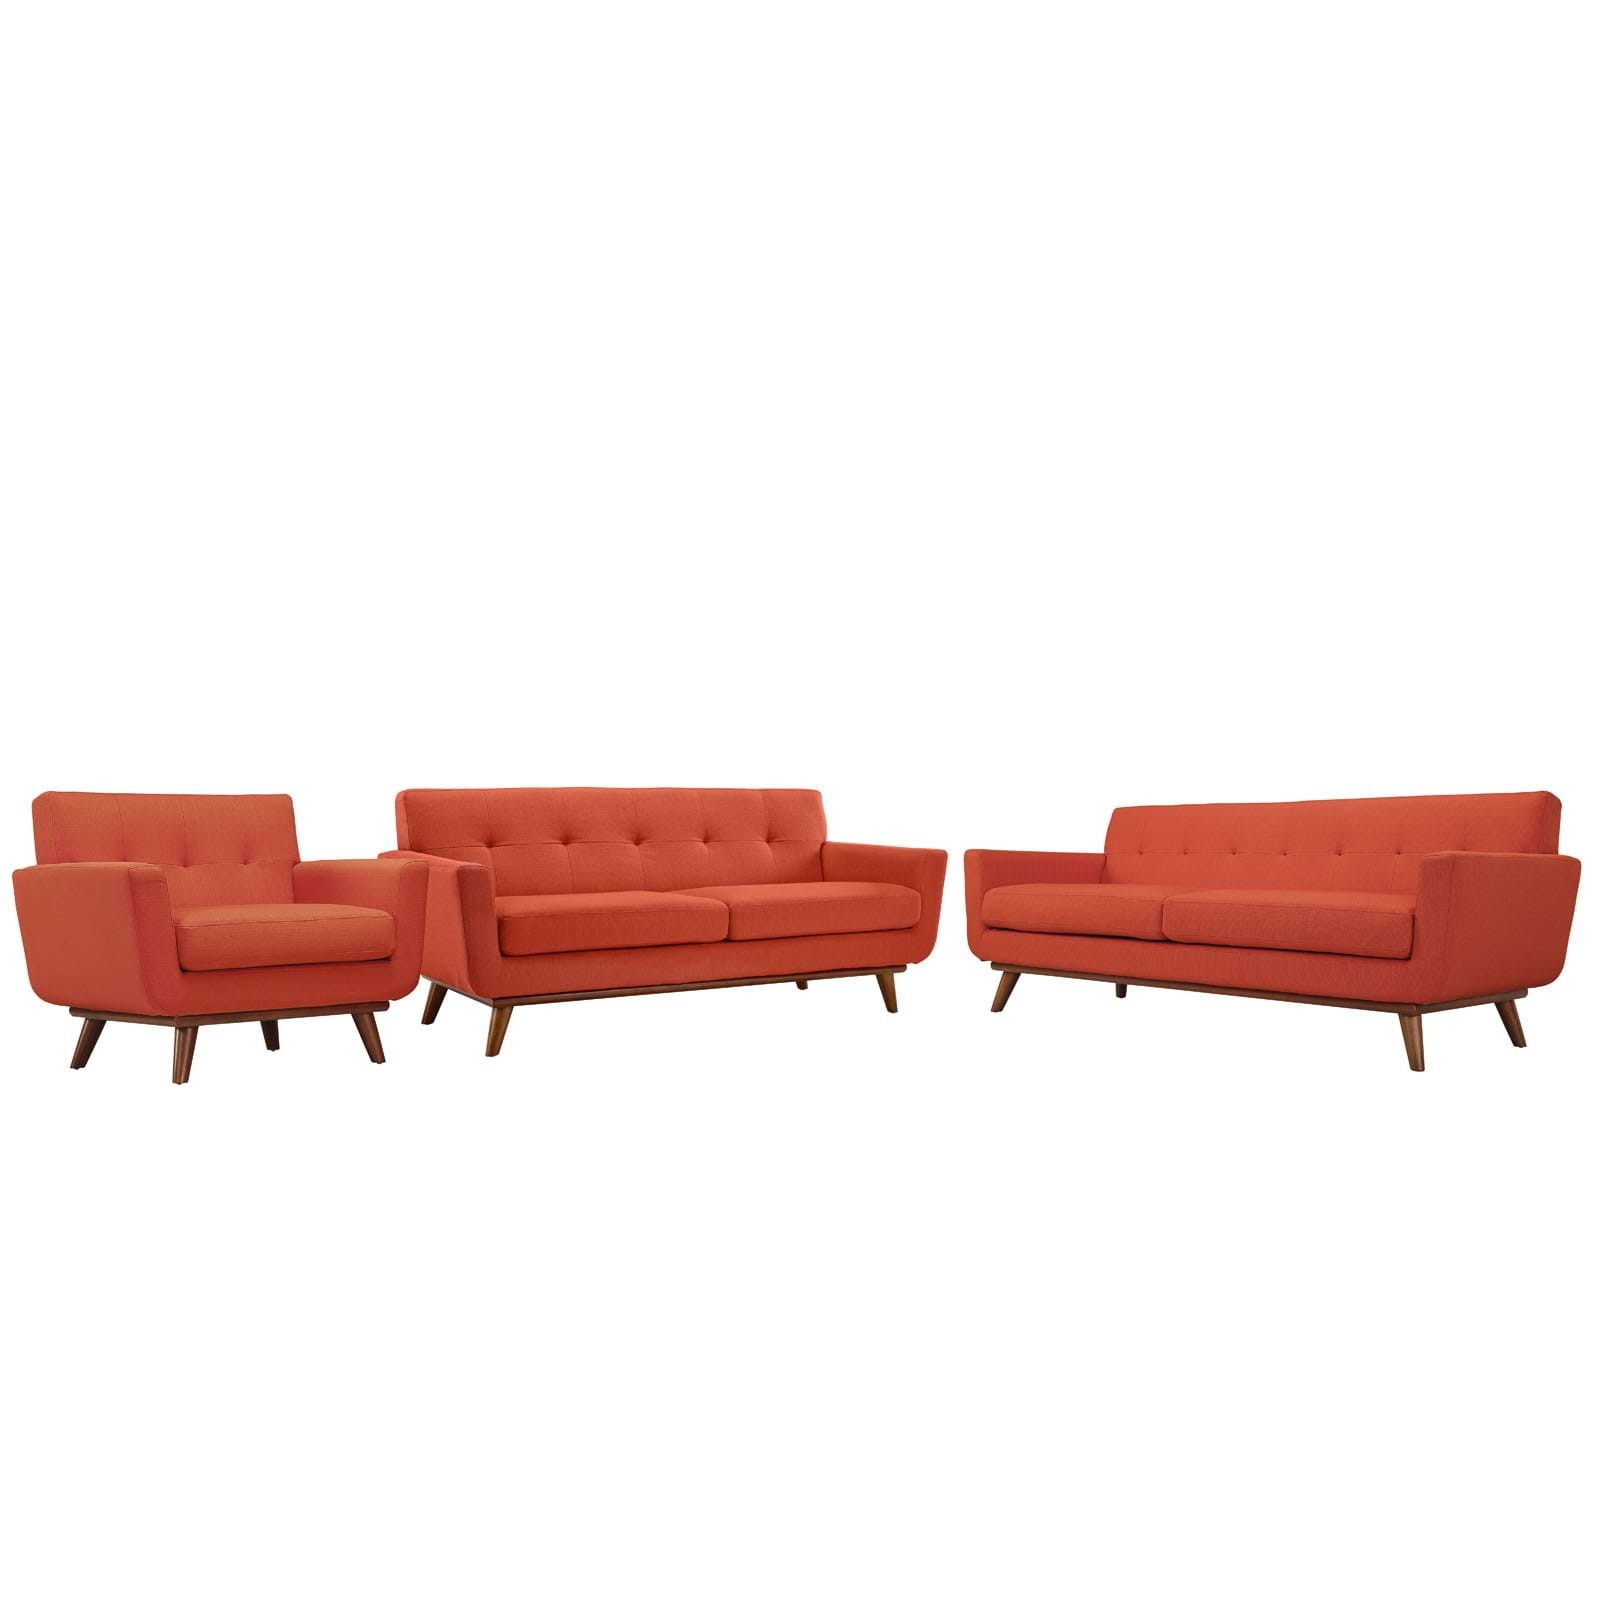 Engage Sofa Loveseat and Armchair Set of 3